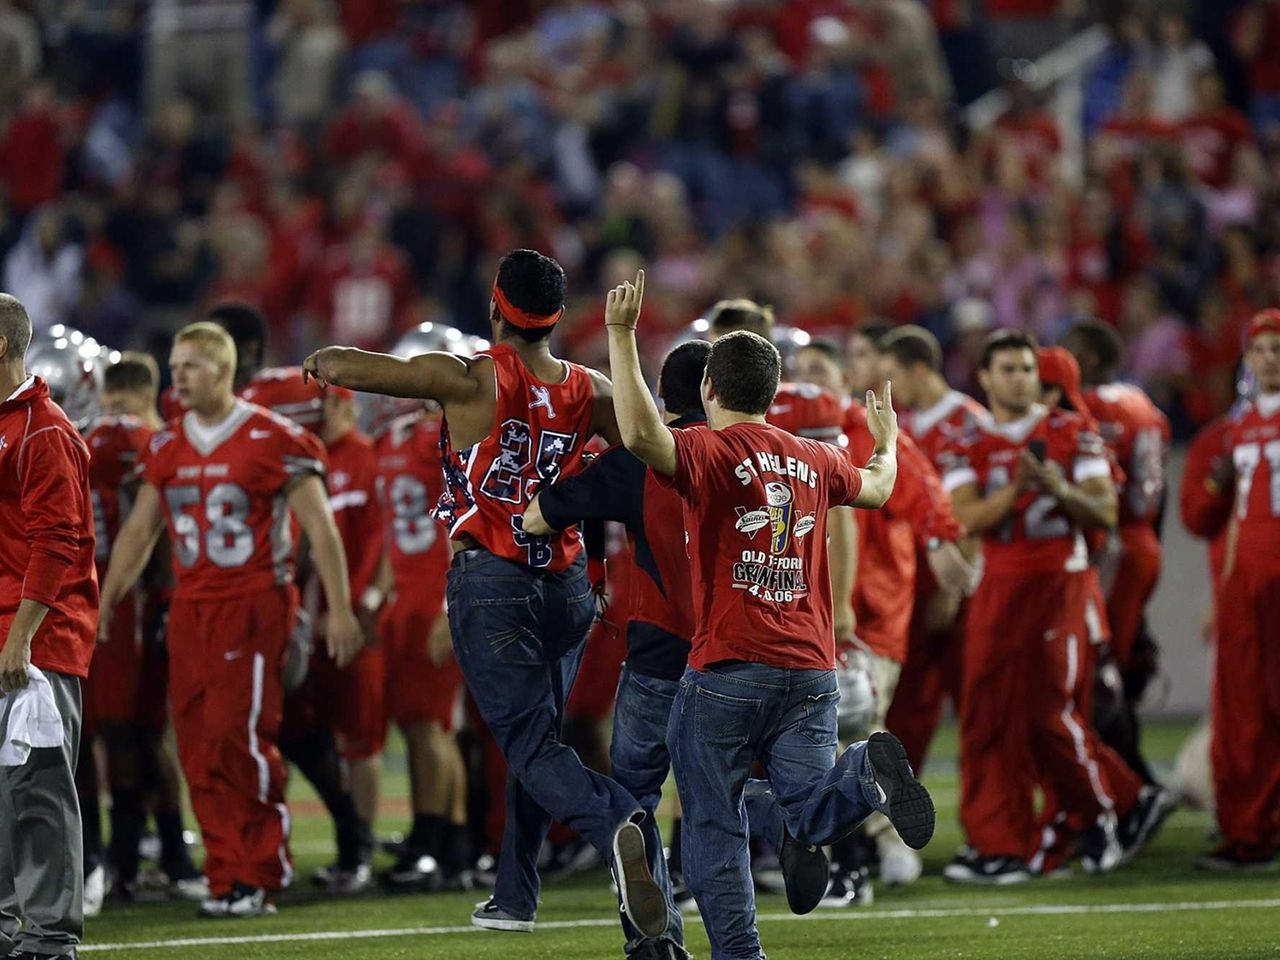 Record crowd shows Stony Brook football has arrived Newsday